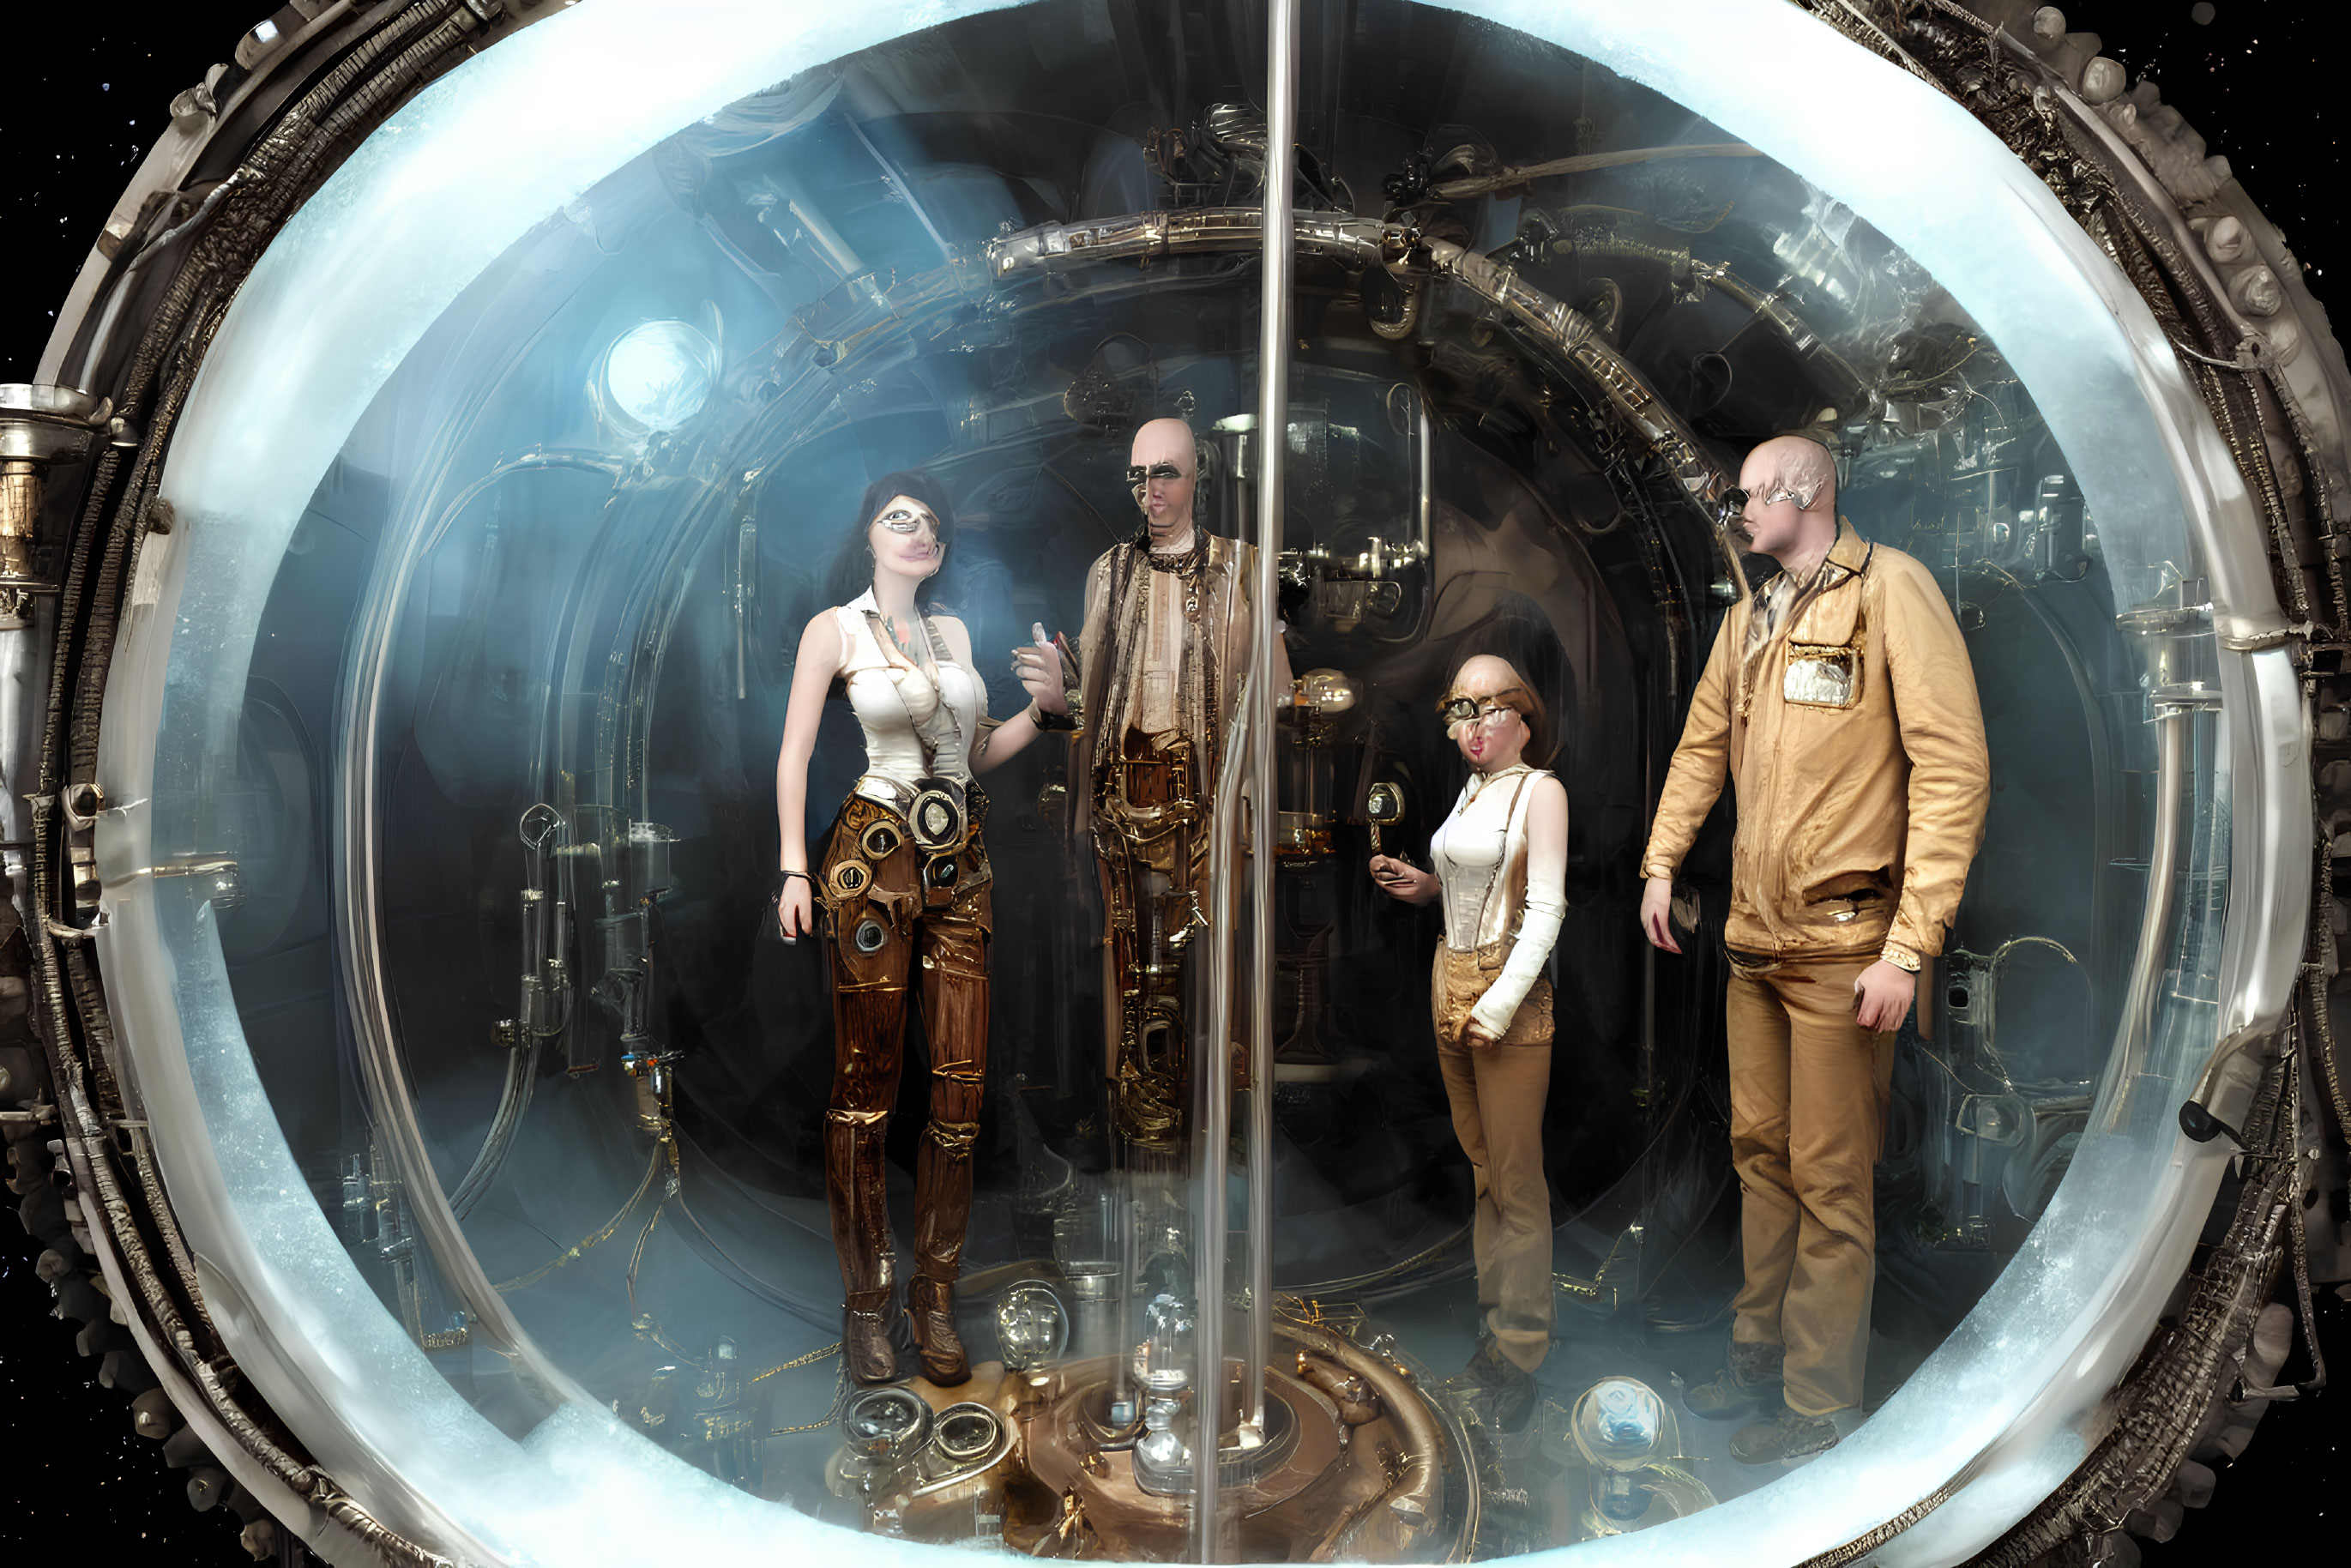 Four individuals in steampunk attire in circular glass chamber with mechanical backdrop